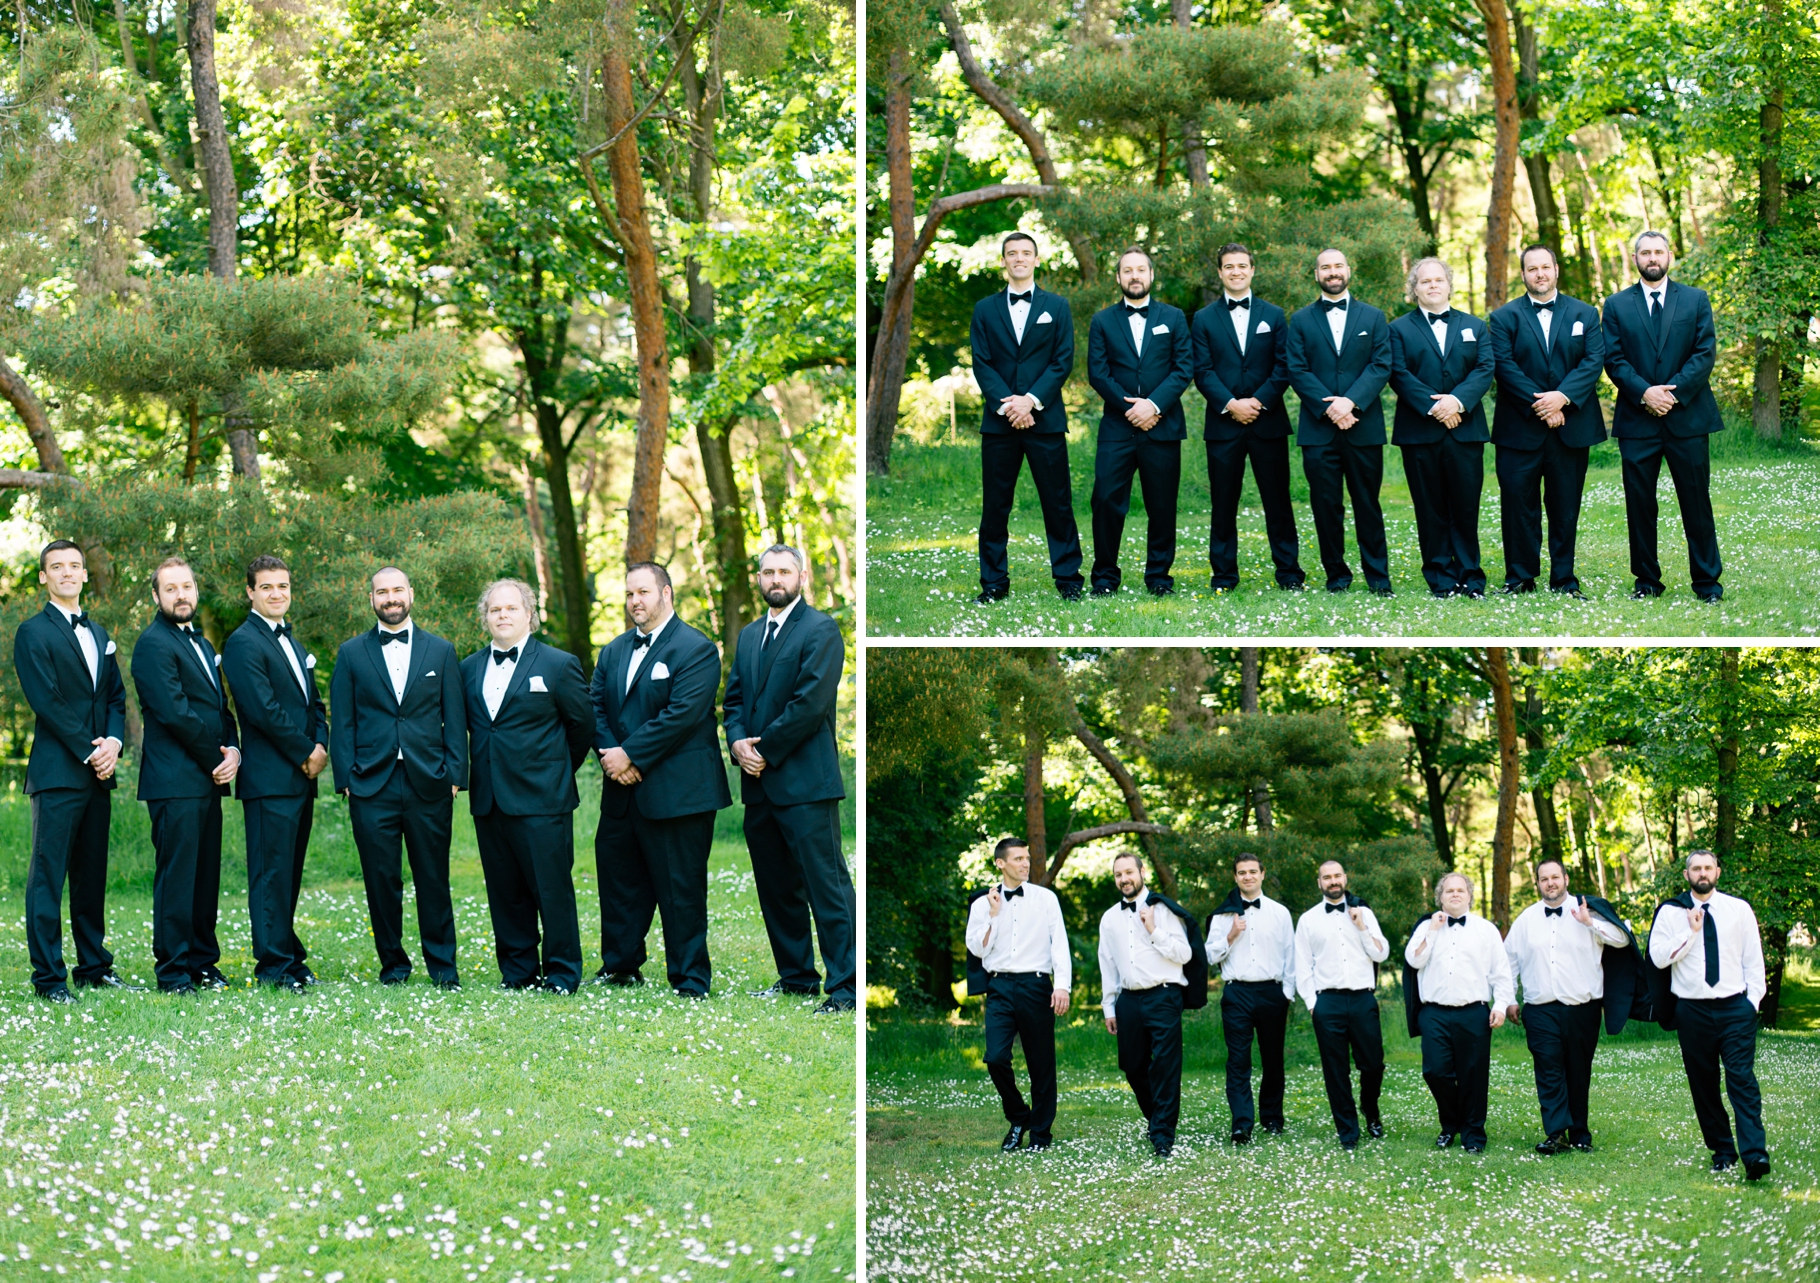 27-Groomsmen-Portraits-Groom-Black-Suits-Classic-Style-Woodland-Park-Seattle-Wedding-Photographer-Photography-by-Betty-Elaine